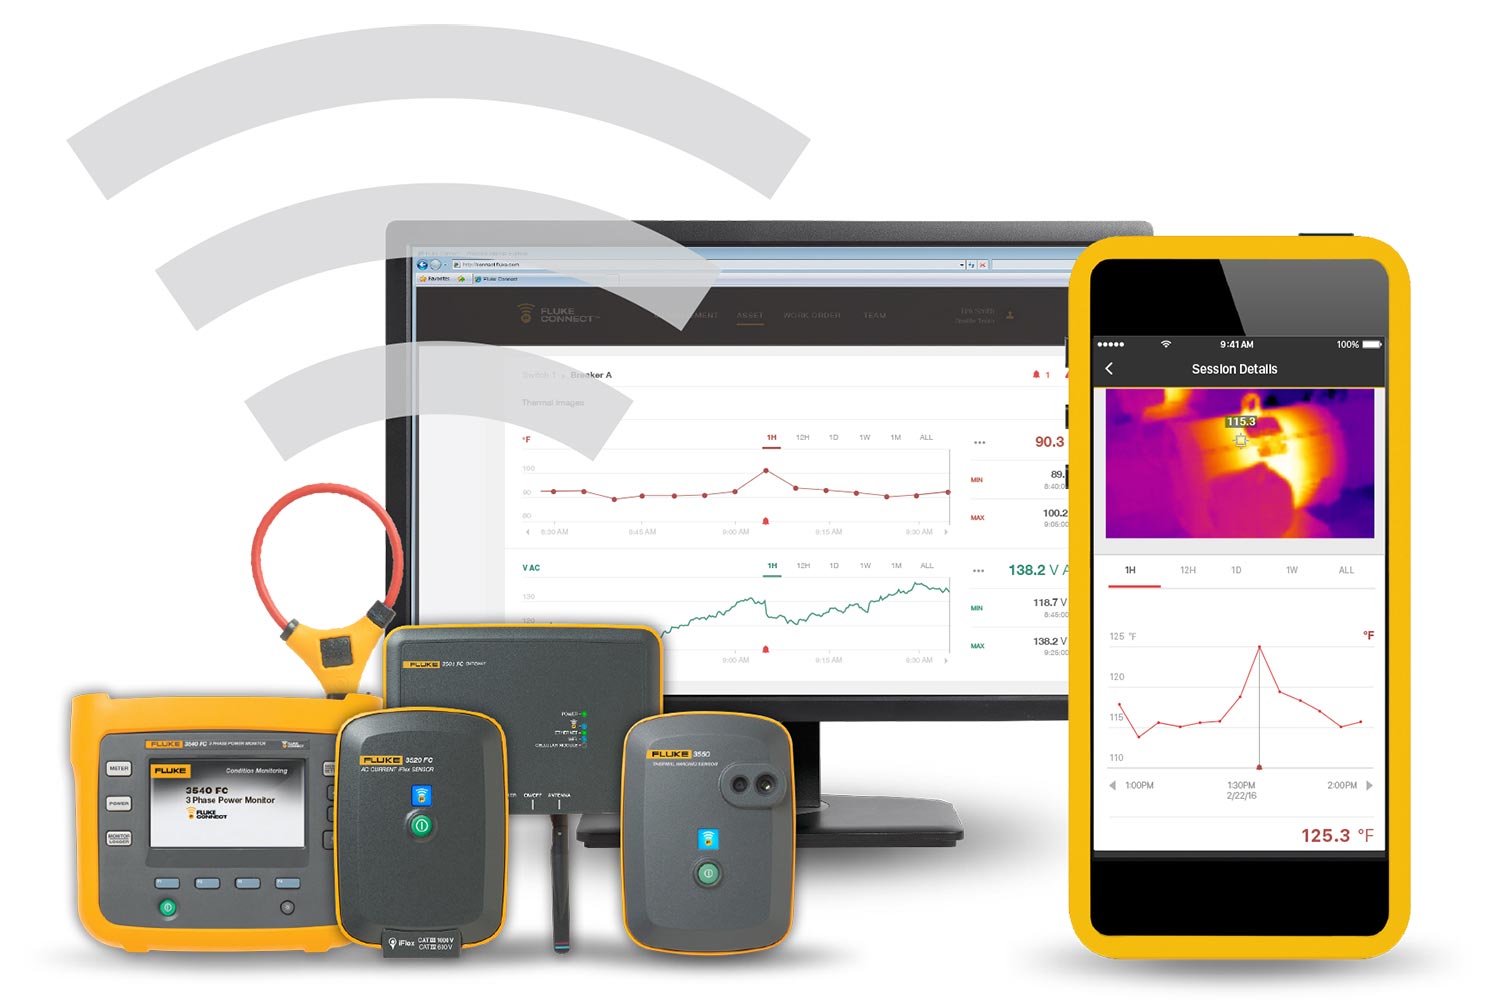 A clickable image of Fluke Connect tools, sensors and software. Leads to the product page.